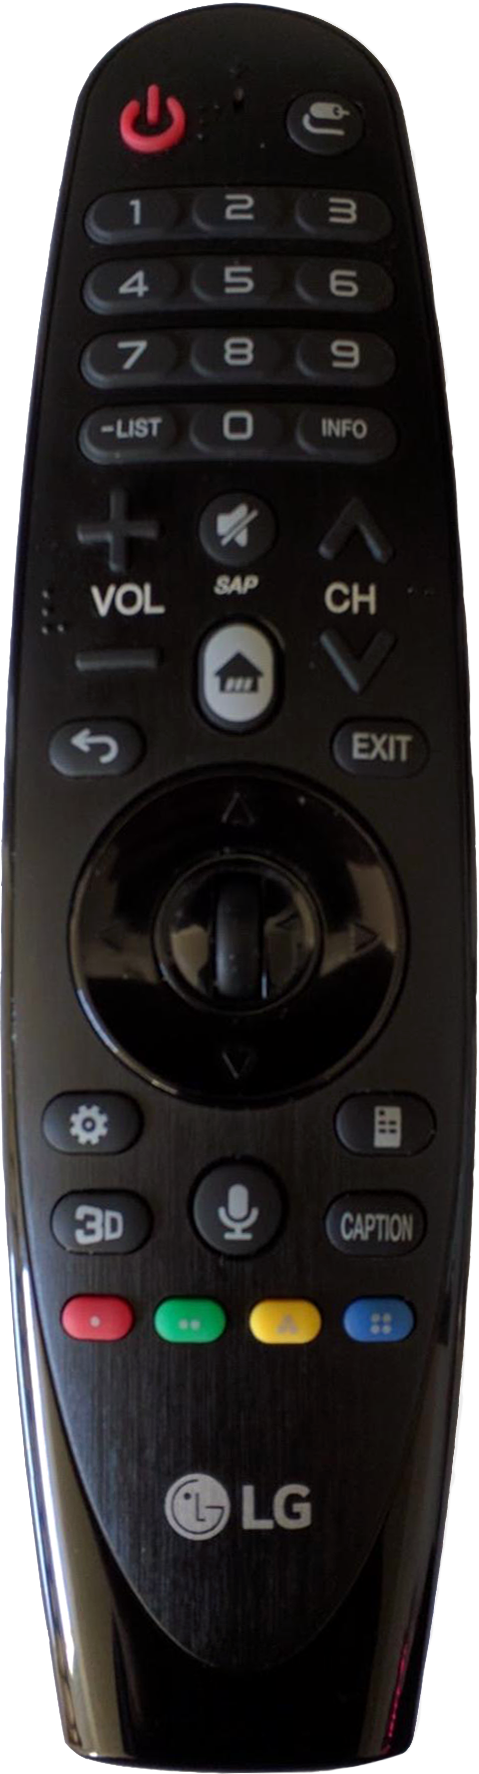 Use An Lg Magic Remote With Sonos Home Theater Speakers Sonos